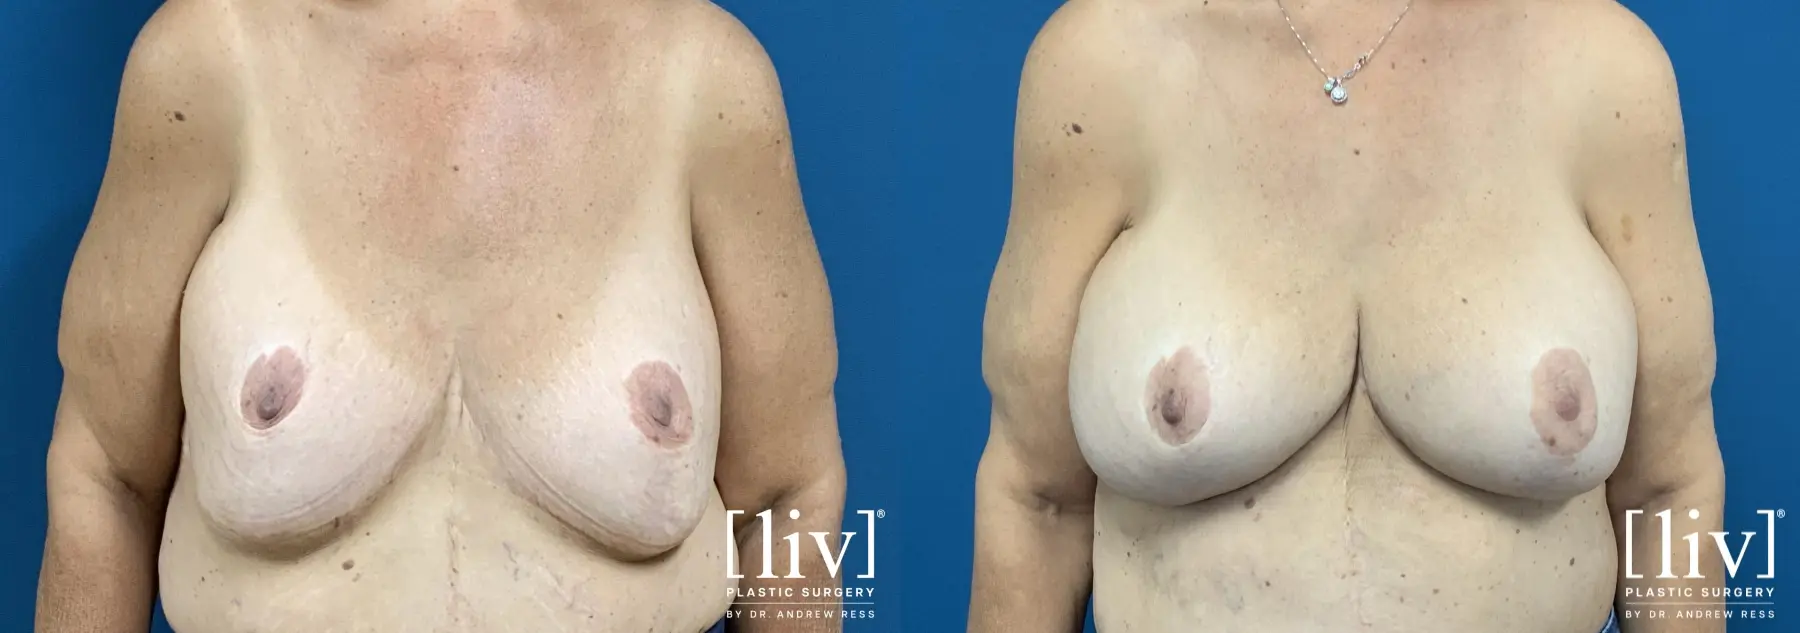 Breast Implant Exchange and Repositioning - Before and After 1